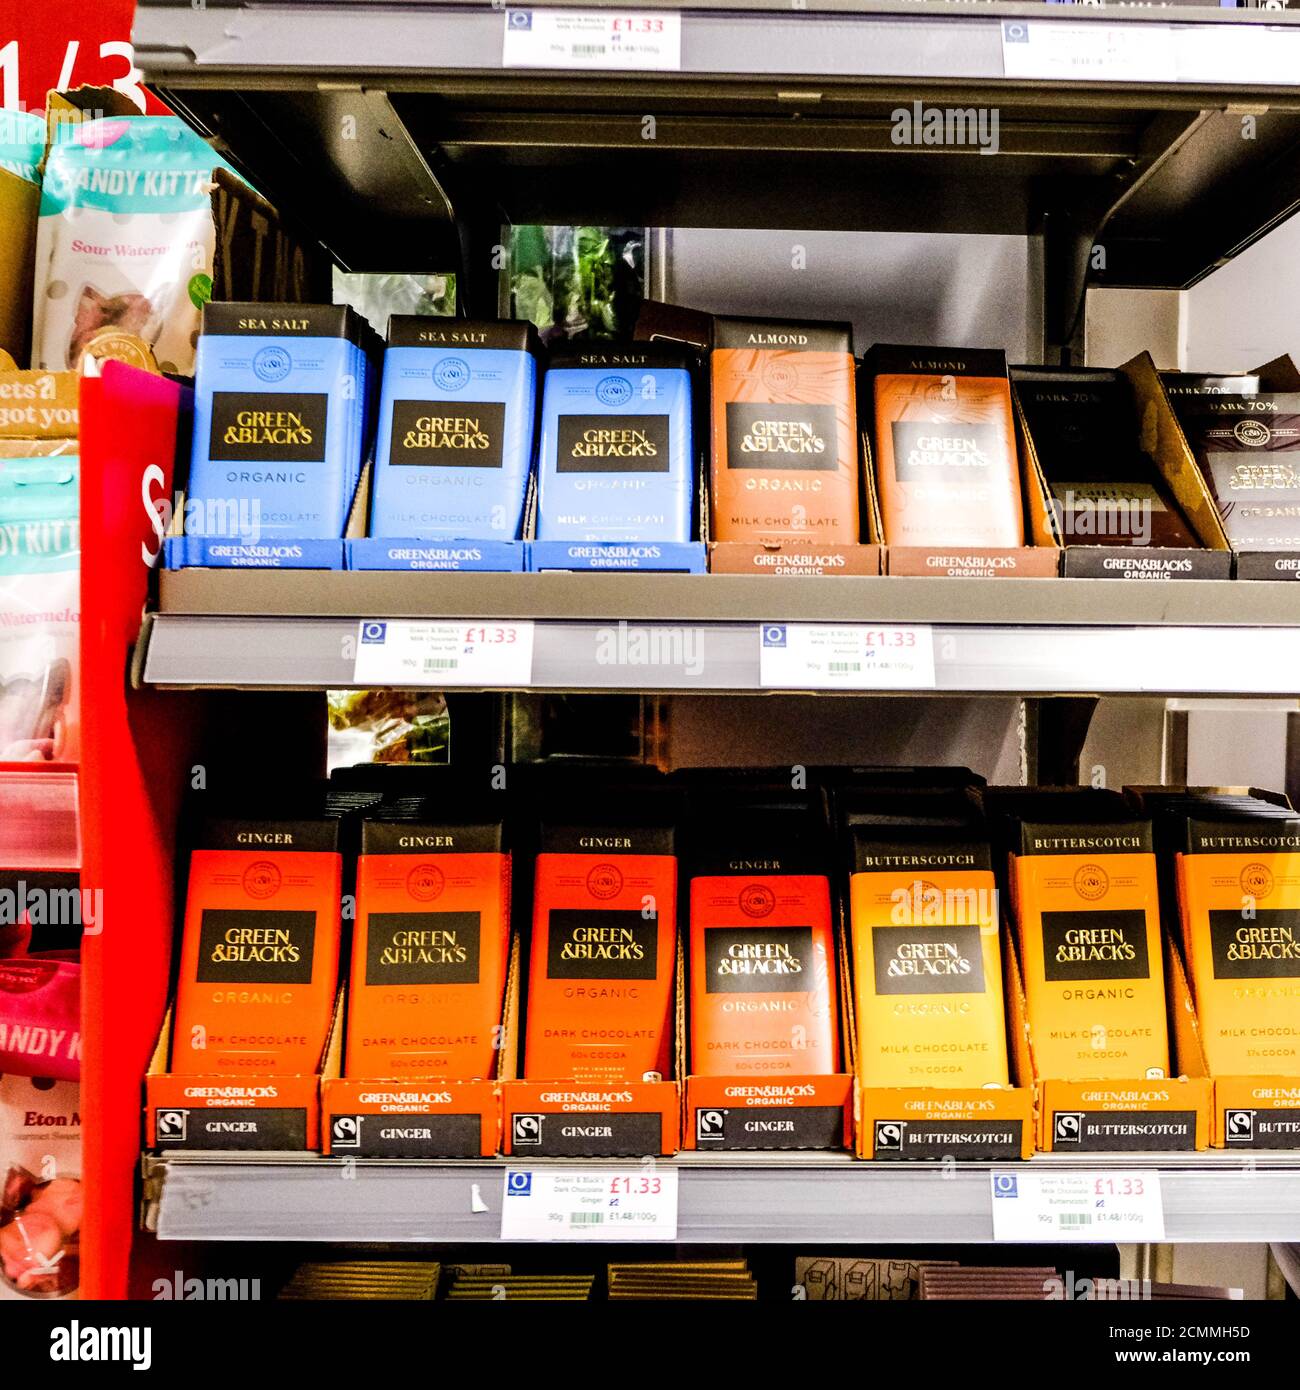 John Lewis Waitrose Selection Of Green & Browns Luxury Chocolate Bars With No People Stock Photo